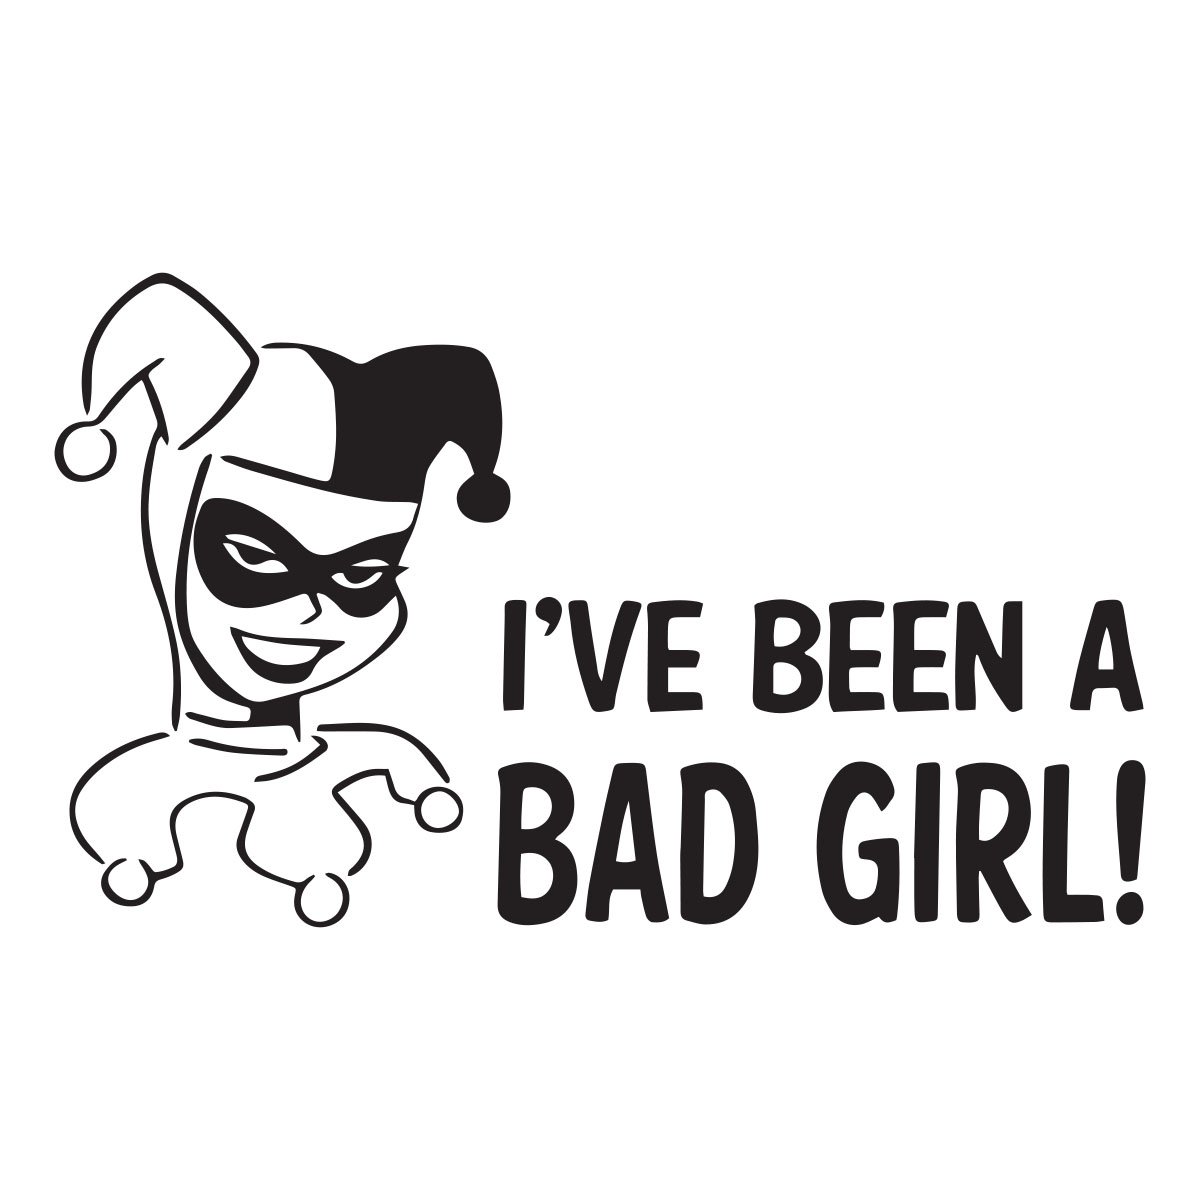 ive been a bad girl